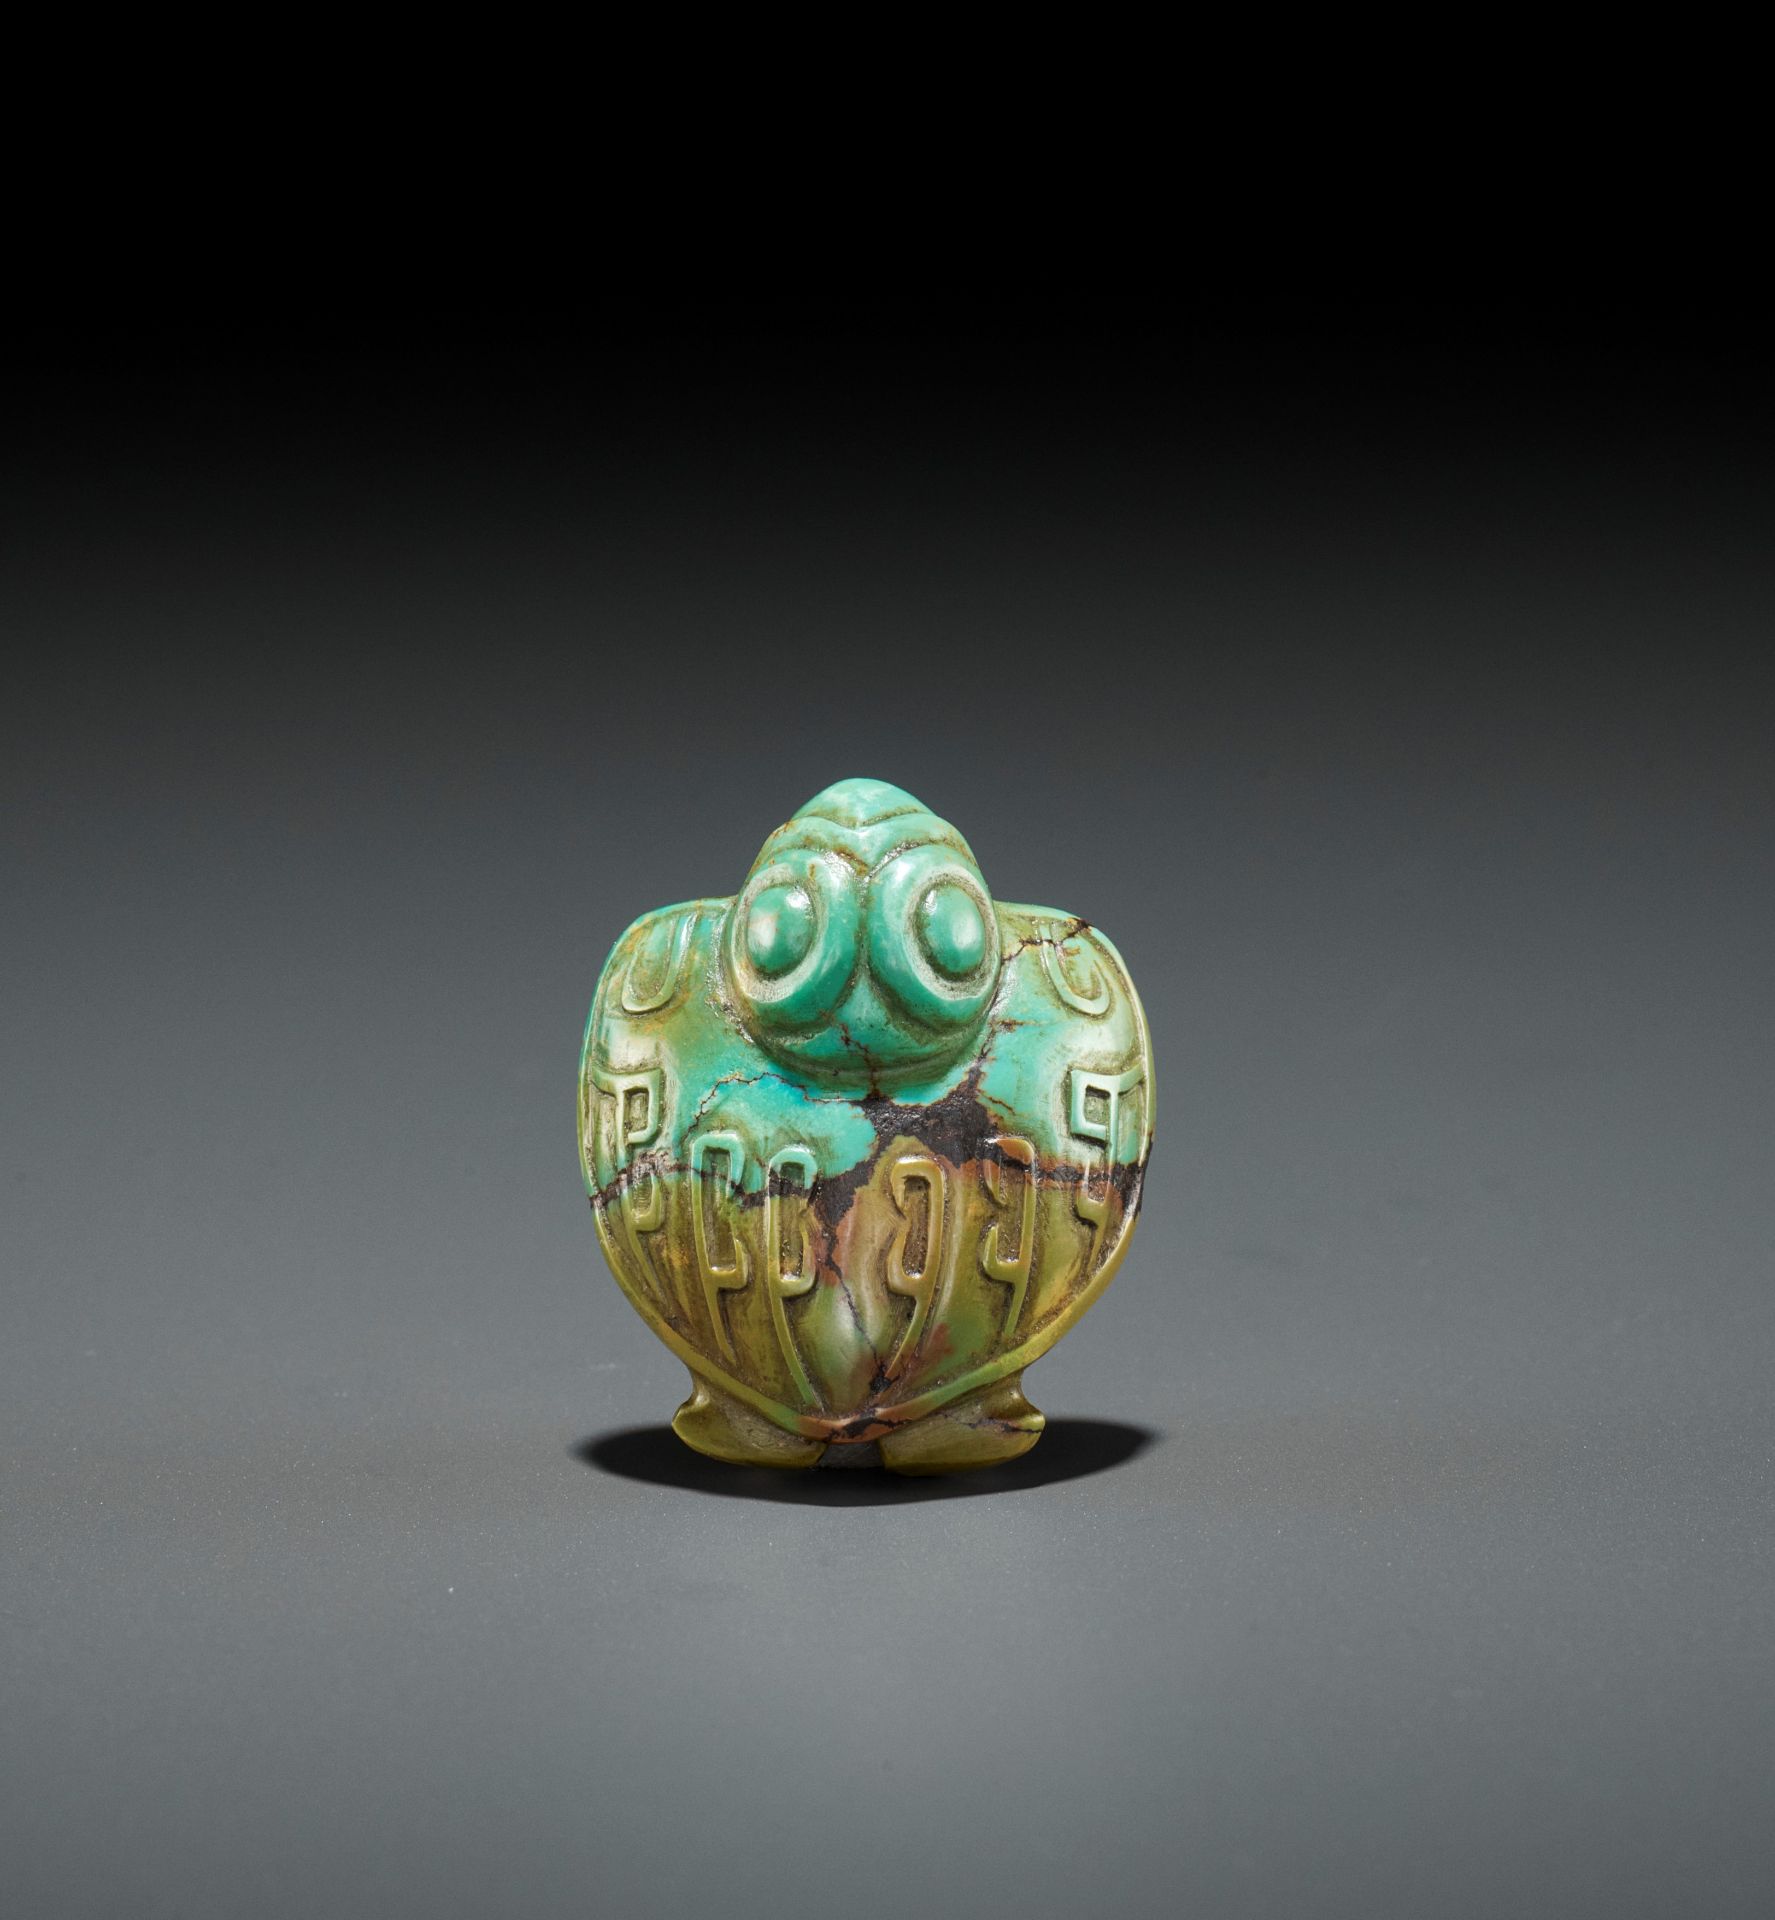 A TURQUOISE PENDANT DEPICTING A BIRD, SHANG TO WESTERN ZHOU DYNASTY